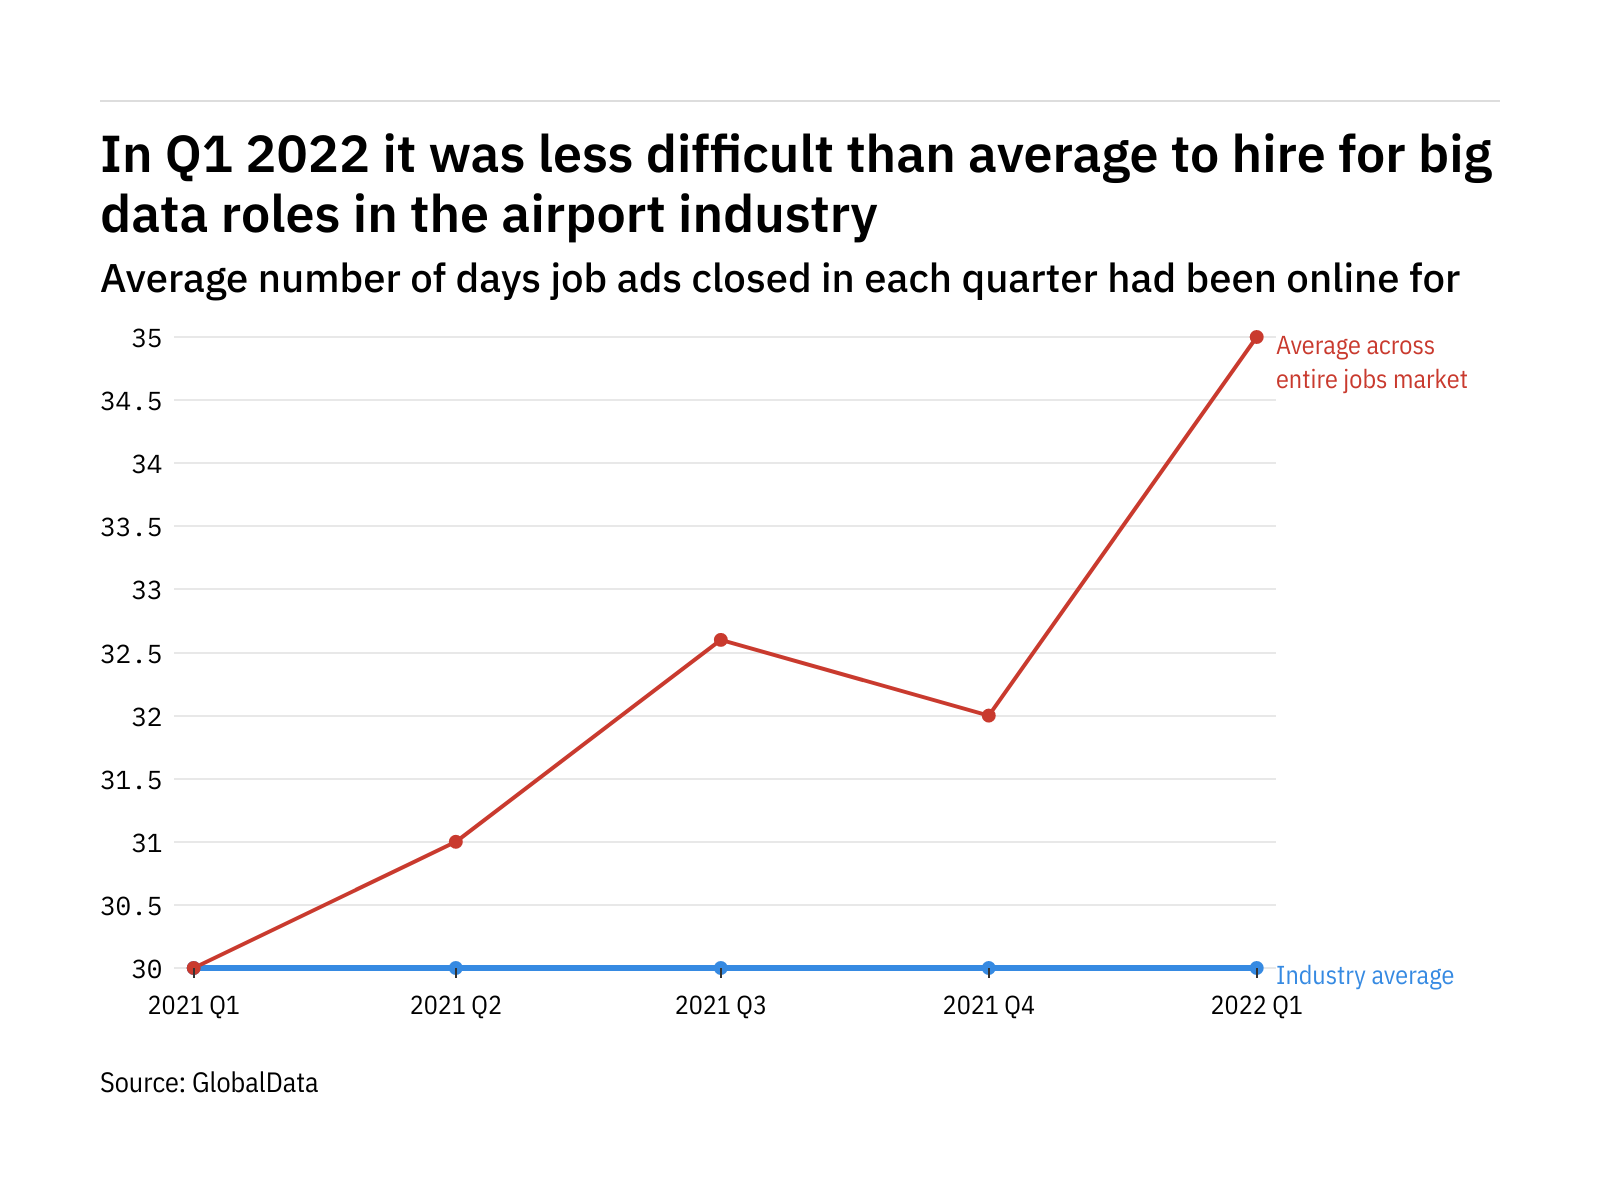 The airport industry found it no easier to fill big data vacancies in Q1 2022